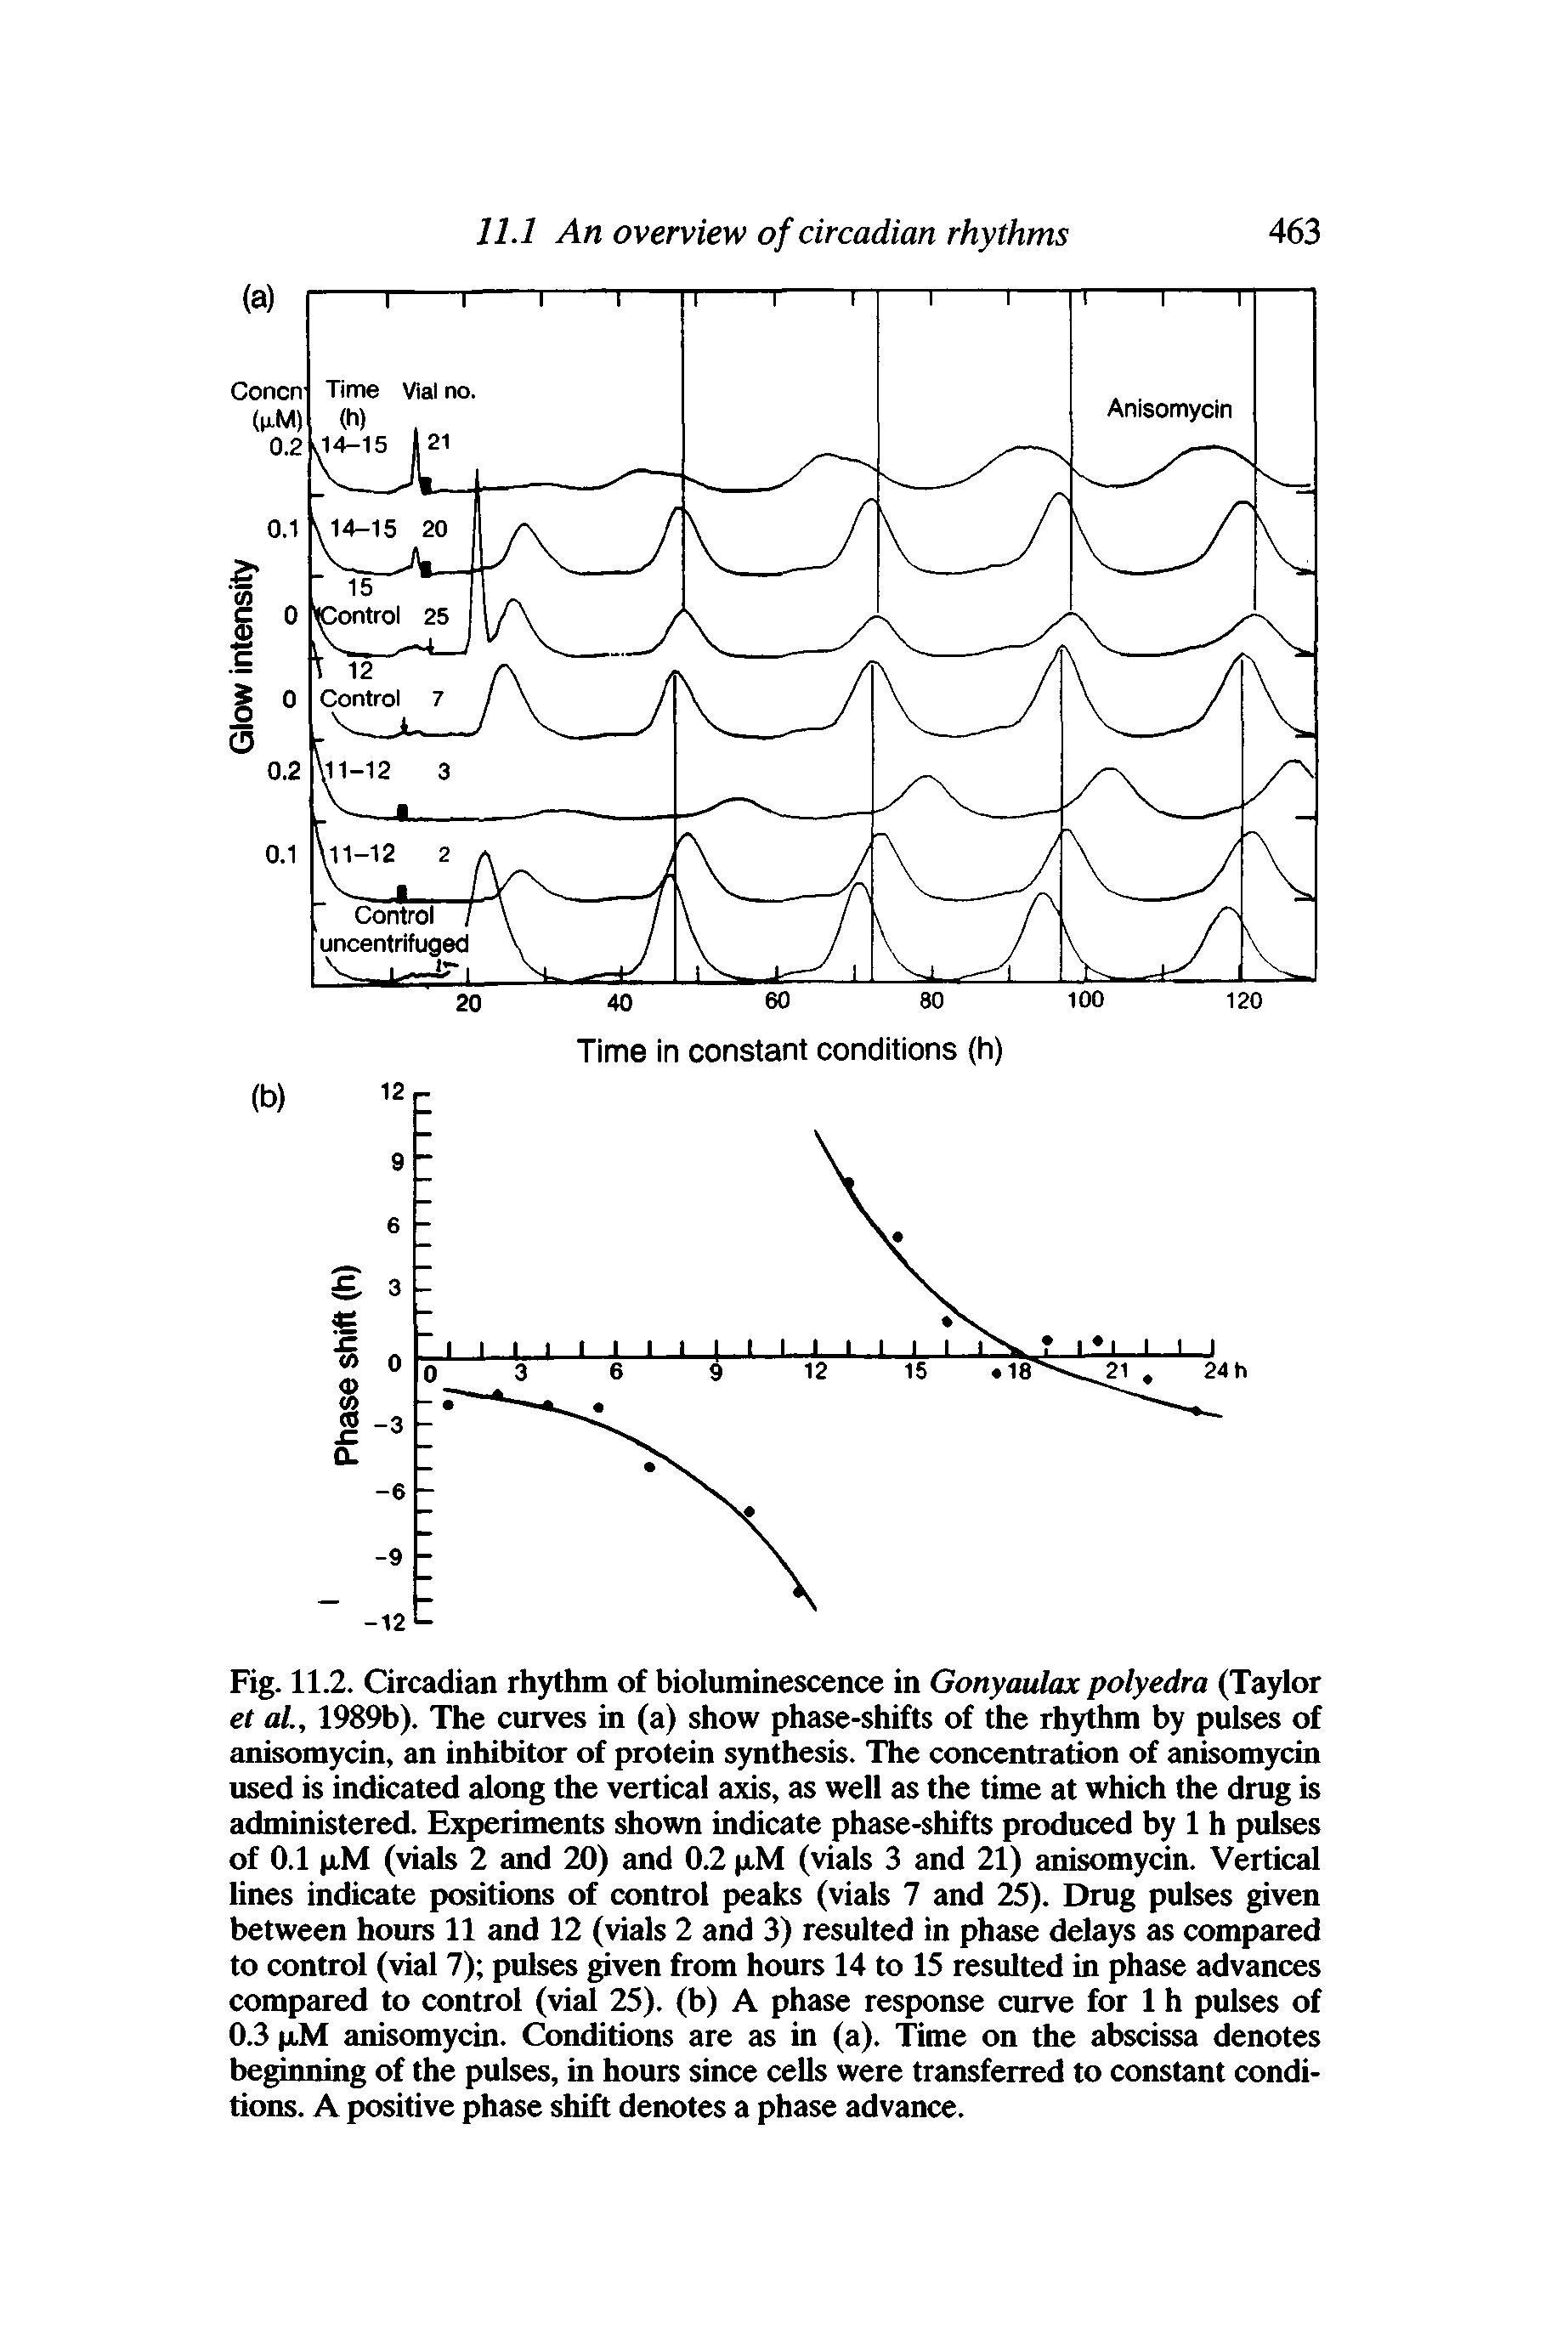 Fig. 11.2. Circadian rhythm of bioluminescence in Gonyaulax polyedra (Taylor et al., 1989b). The curves in (a) show phase-shifts of the rhythm by pulses of anisomycin, an inhibitor of protein synthesis. The concentration of anisomycin used is indicated along the vertical axis, as well as the time at which the drug is administered. Experiments shown indicate phase-shifts produced by 1 h pulses of 0.1 pM (vials 2 and 20) and 0.2 pM (vials 3 and 21) anisomycin. Vertical lines indicate positions of control peaks (vials 7 and 25). Drug pulses given between hours 11 and 12 (vials 2 and 3) resulted in phase delays as compared to control (vial 7) pulses given from hours 14 to 15 resulted in phase advances compared to control (vial 25). (b) A phase response curve for 1 h pulses of 0.3 pM anisomycin. Conditions are as in (a). Time on the abscissa denotes beginning of the pulses, in hours since cells were transferred to constant conditions. A positive phase shift denotes a phase advance.